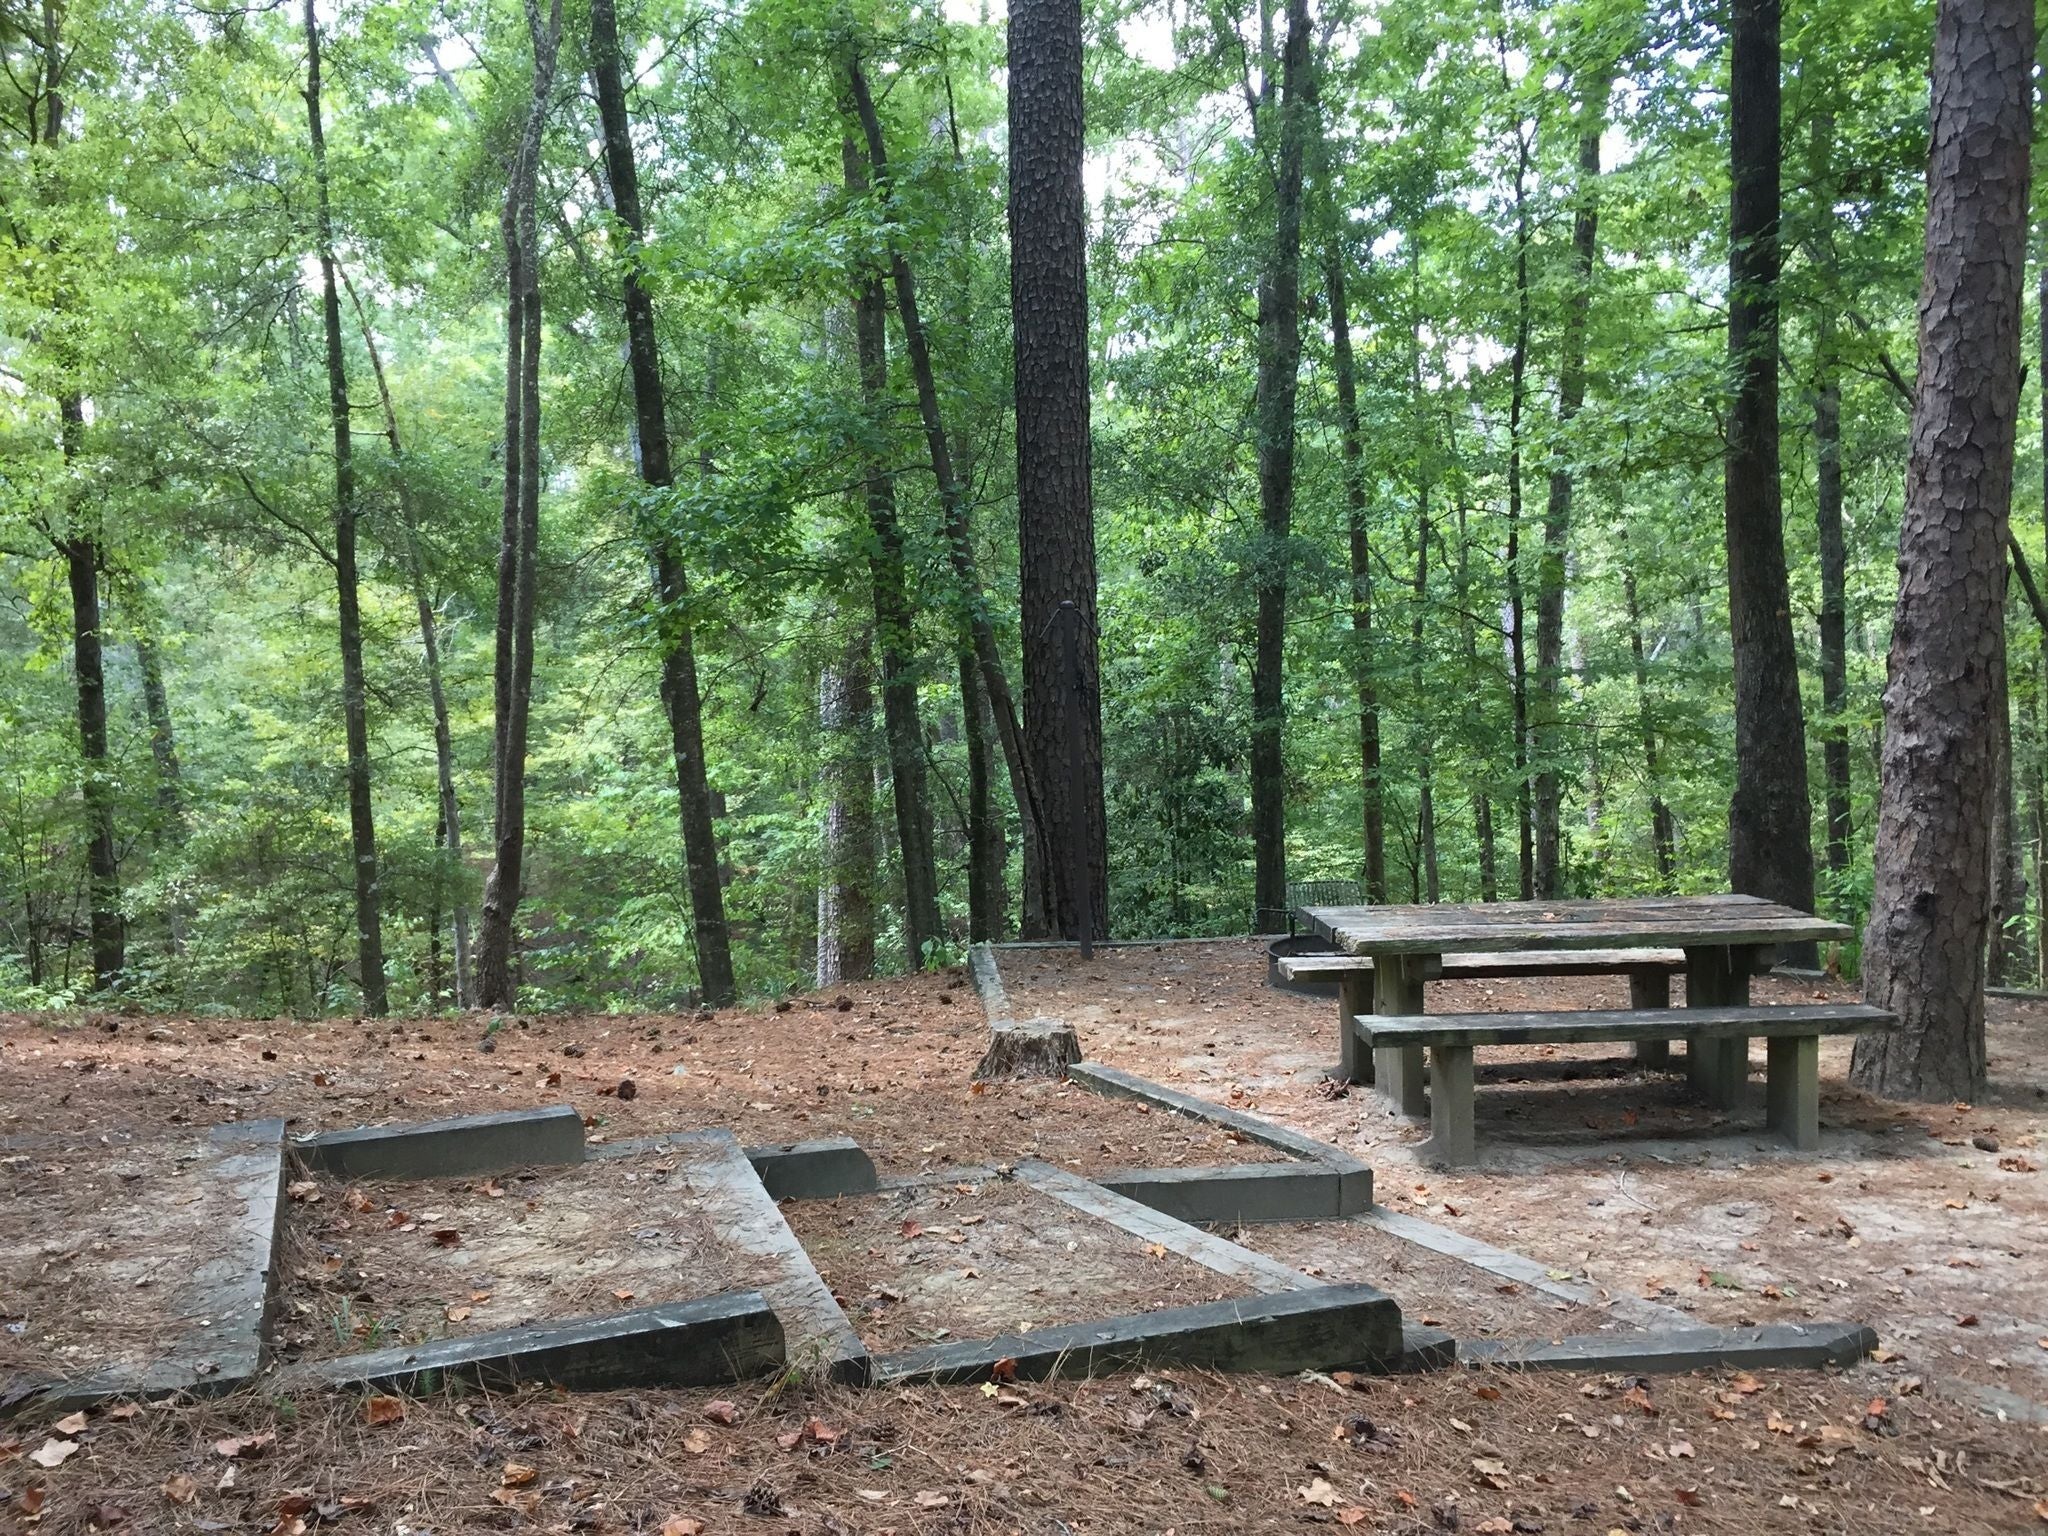 Camping in Holly Springs National Forest